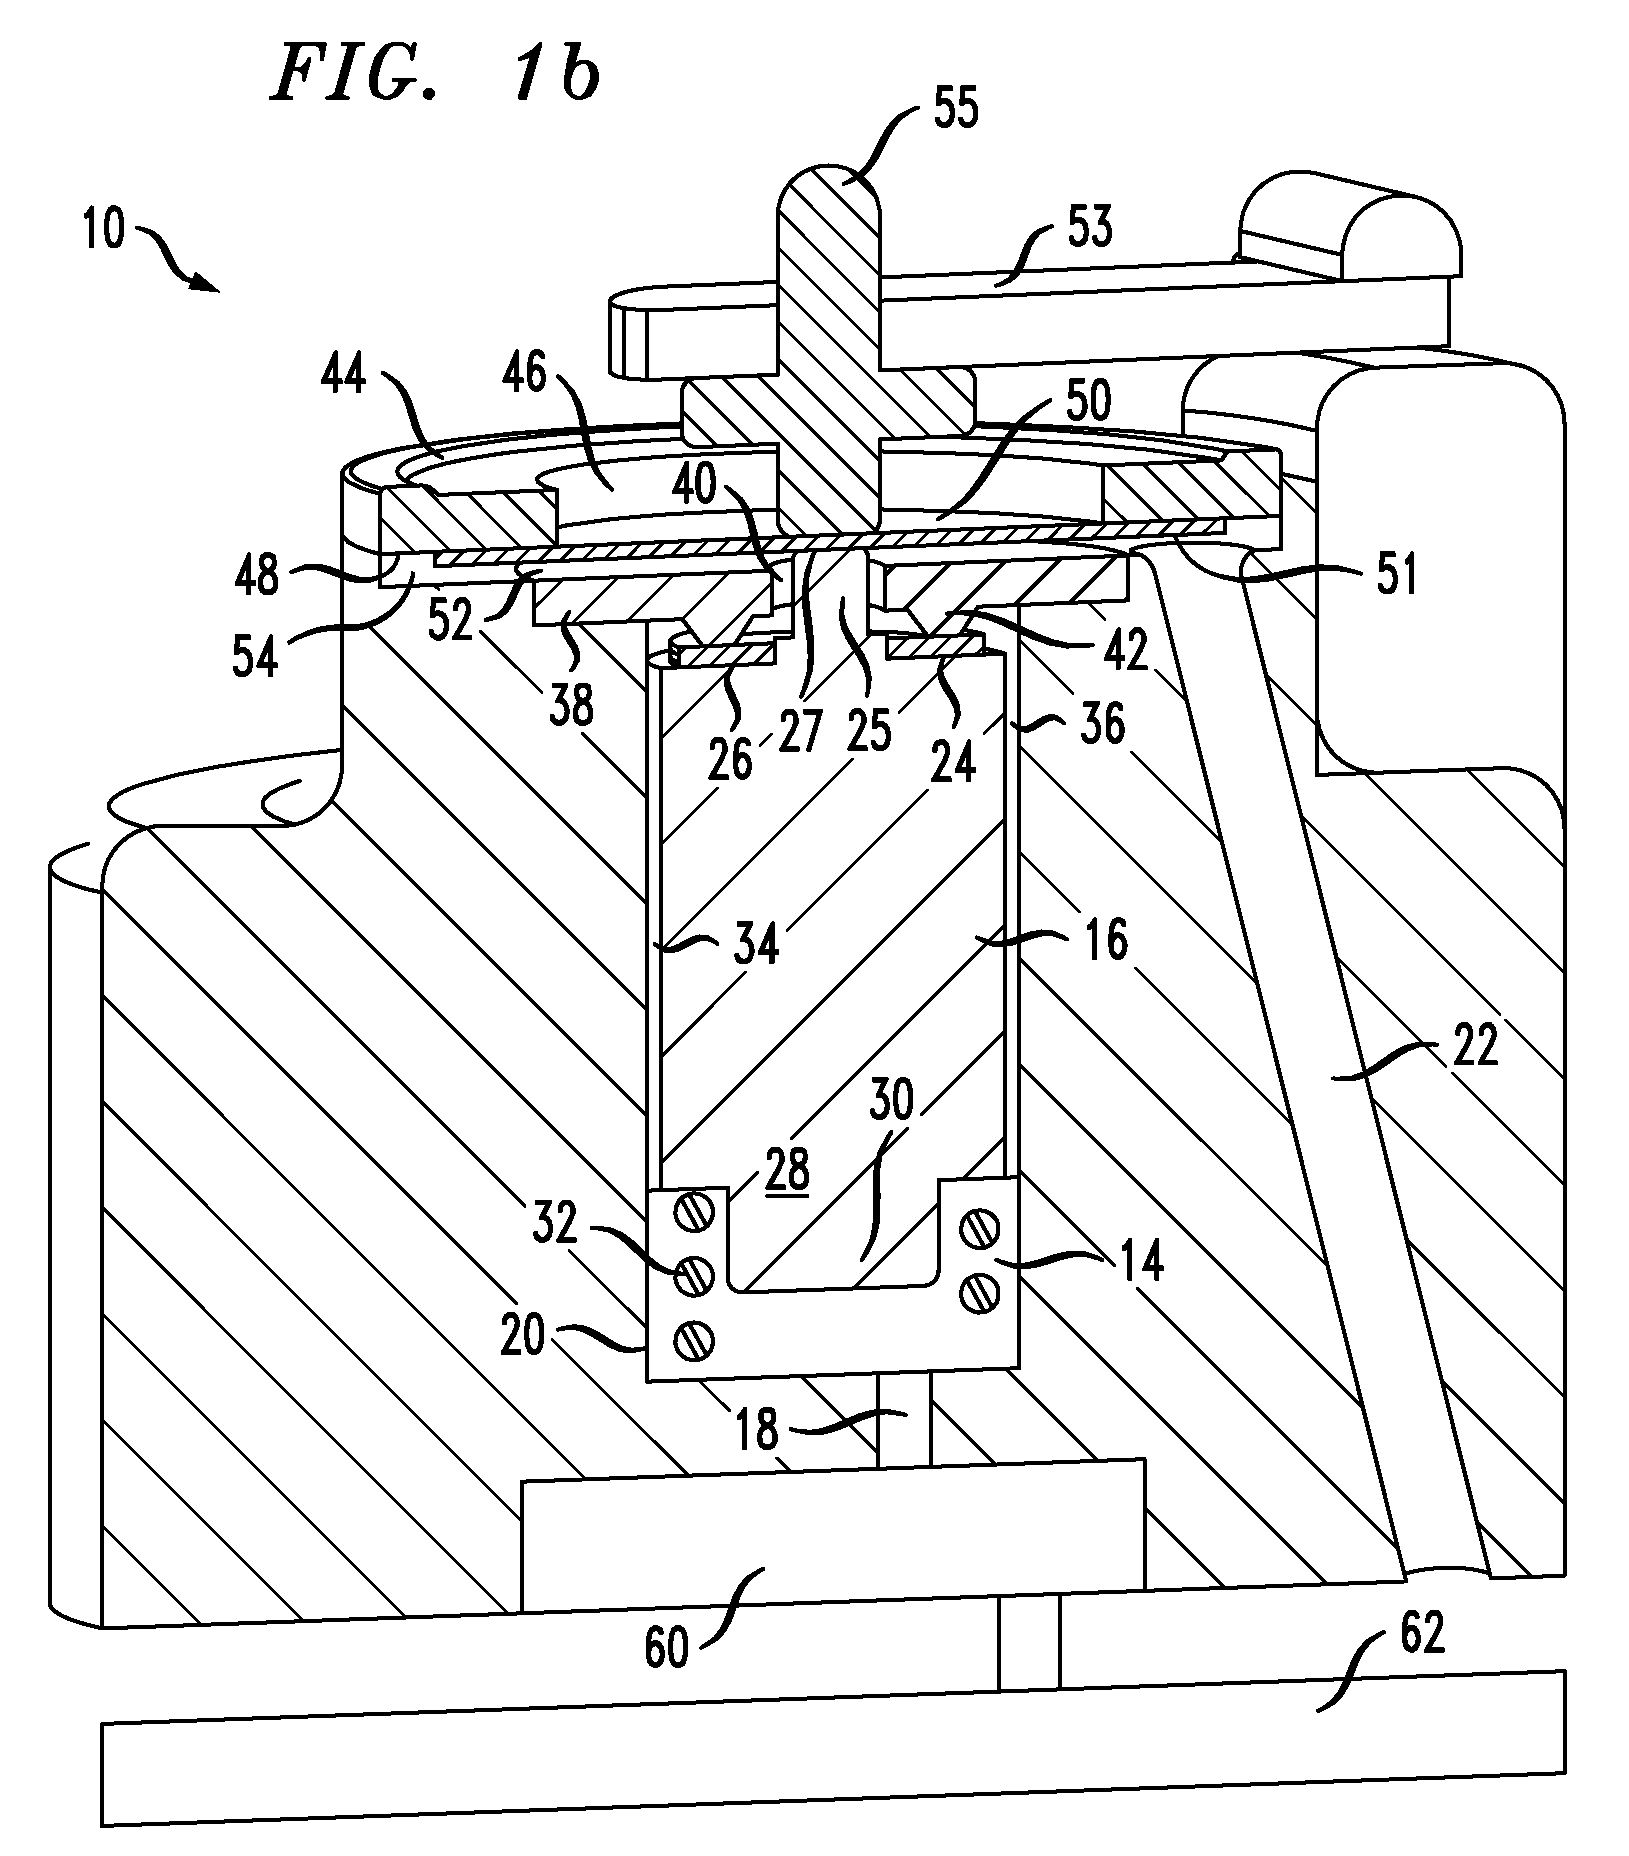 Flow Rate Accuracy of a Fluidic Delivery System